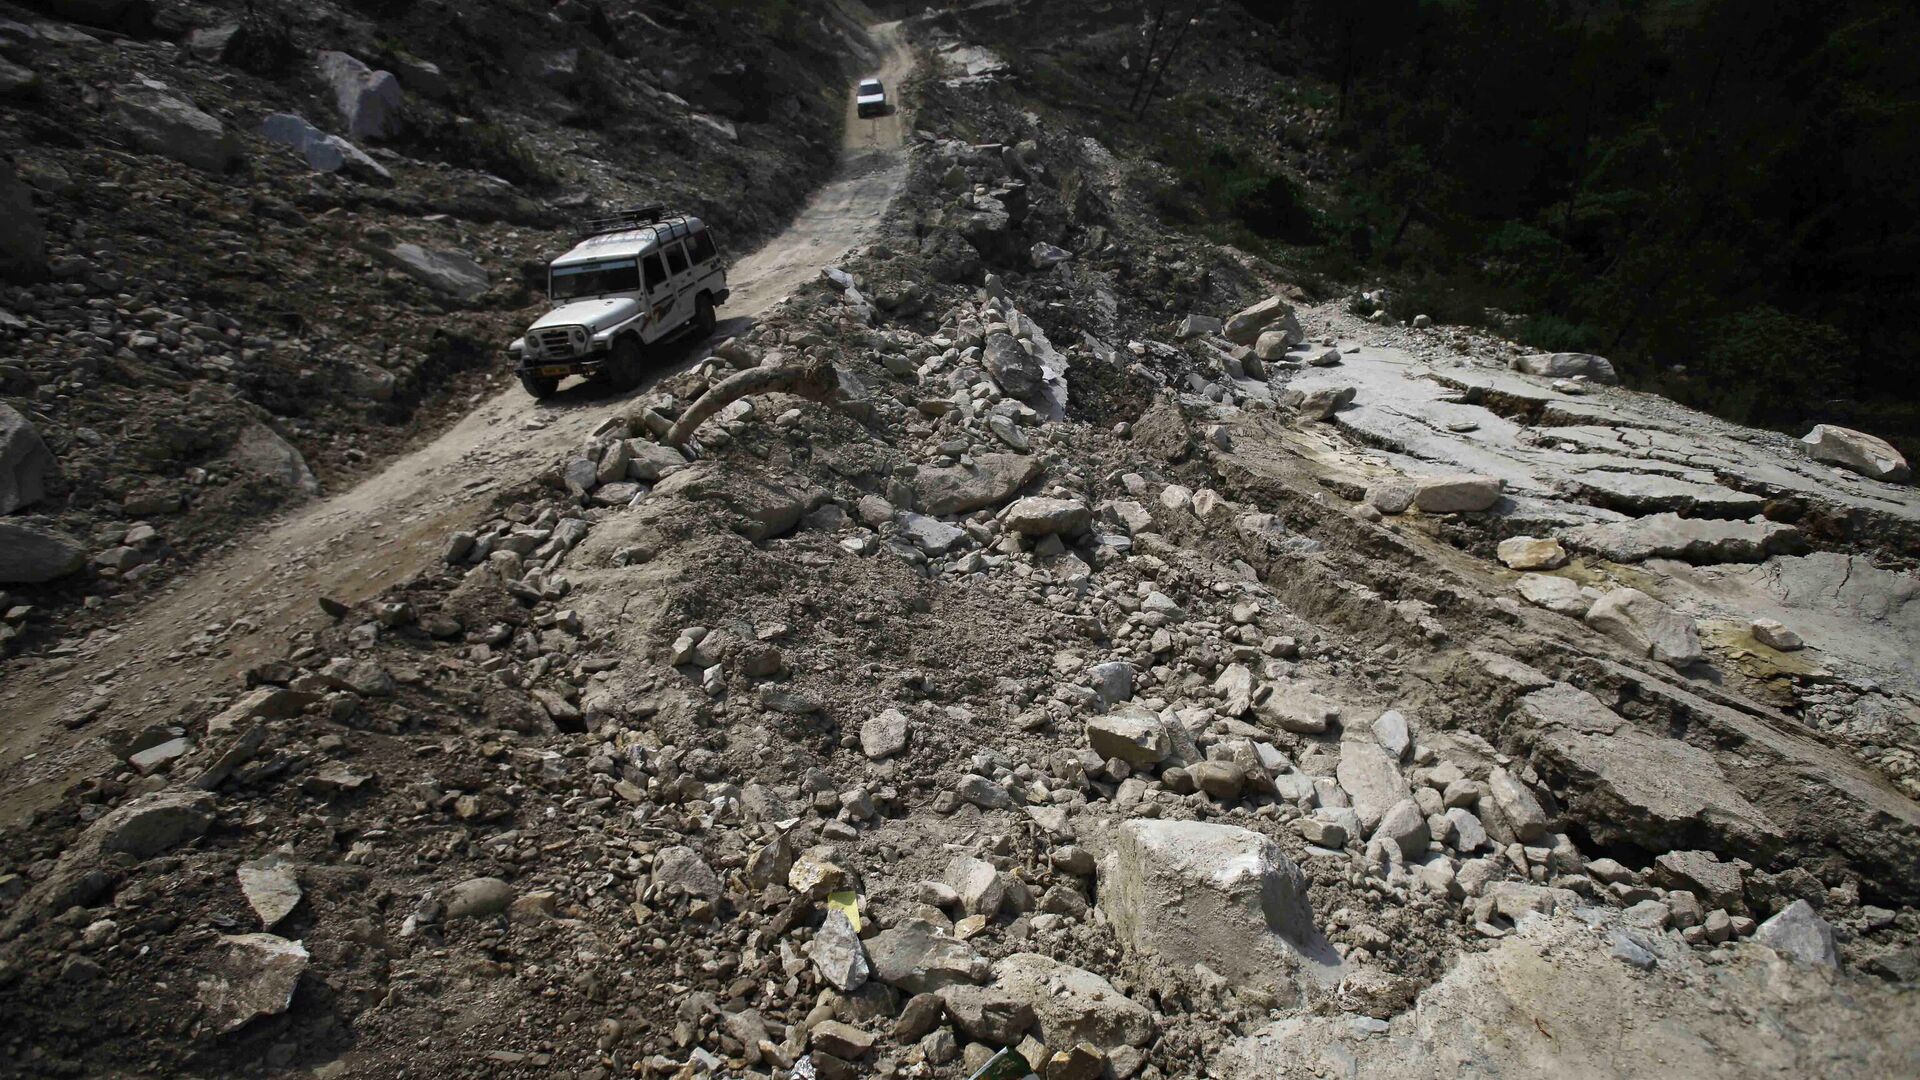  Cars are seen on a road destroyed by landslides and floods,  in Joshimath, India, Friday, June 21, 2013. The heavy rains caused by the annual monsoon have left more than 500 people dead and stranded tens of thousands, mostly pilgrims, in India’s northern mountainous region, officials said Friday.  - Sputnik India, 1920, 05.01.2023